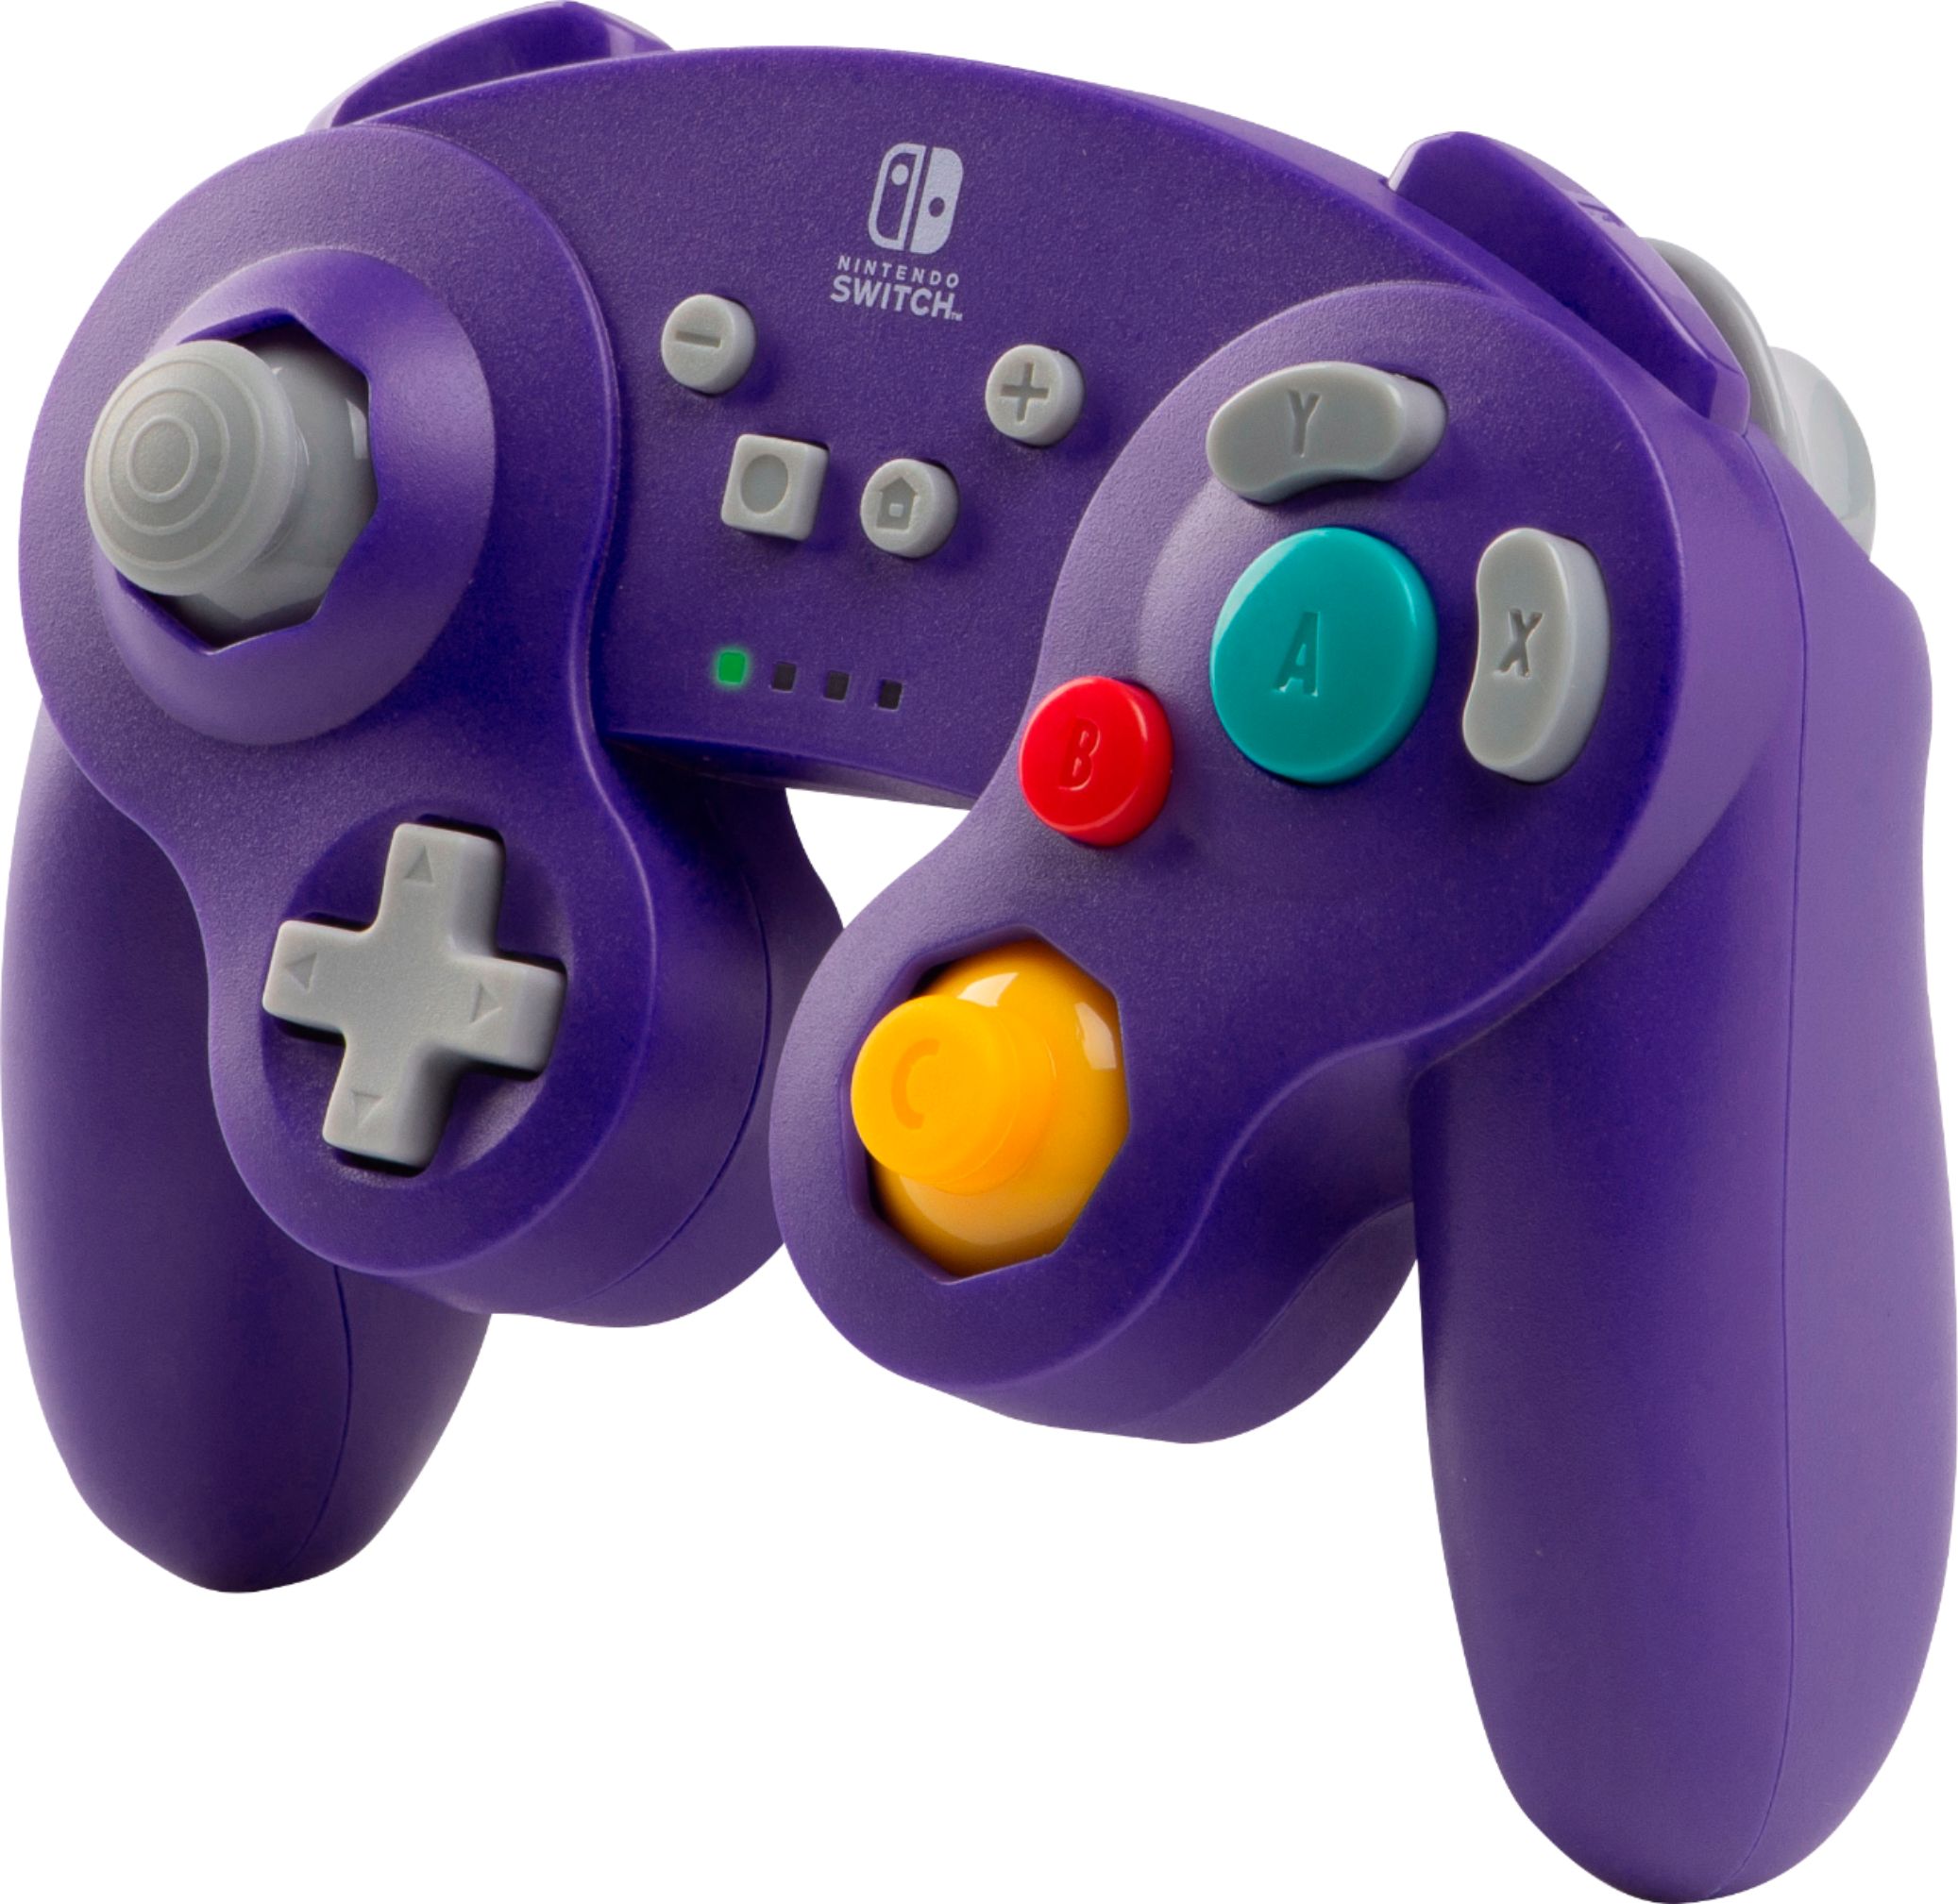 switch gamecube pro controller